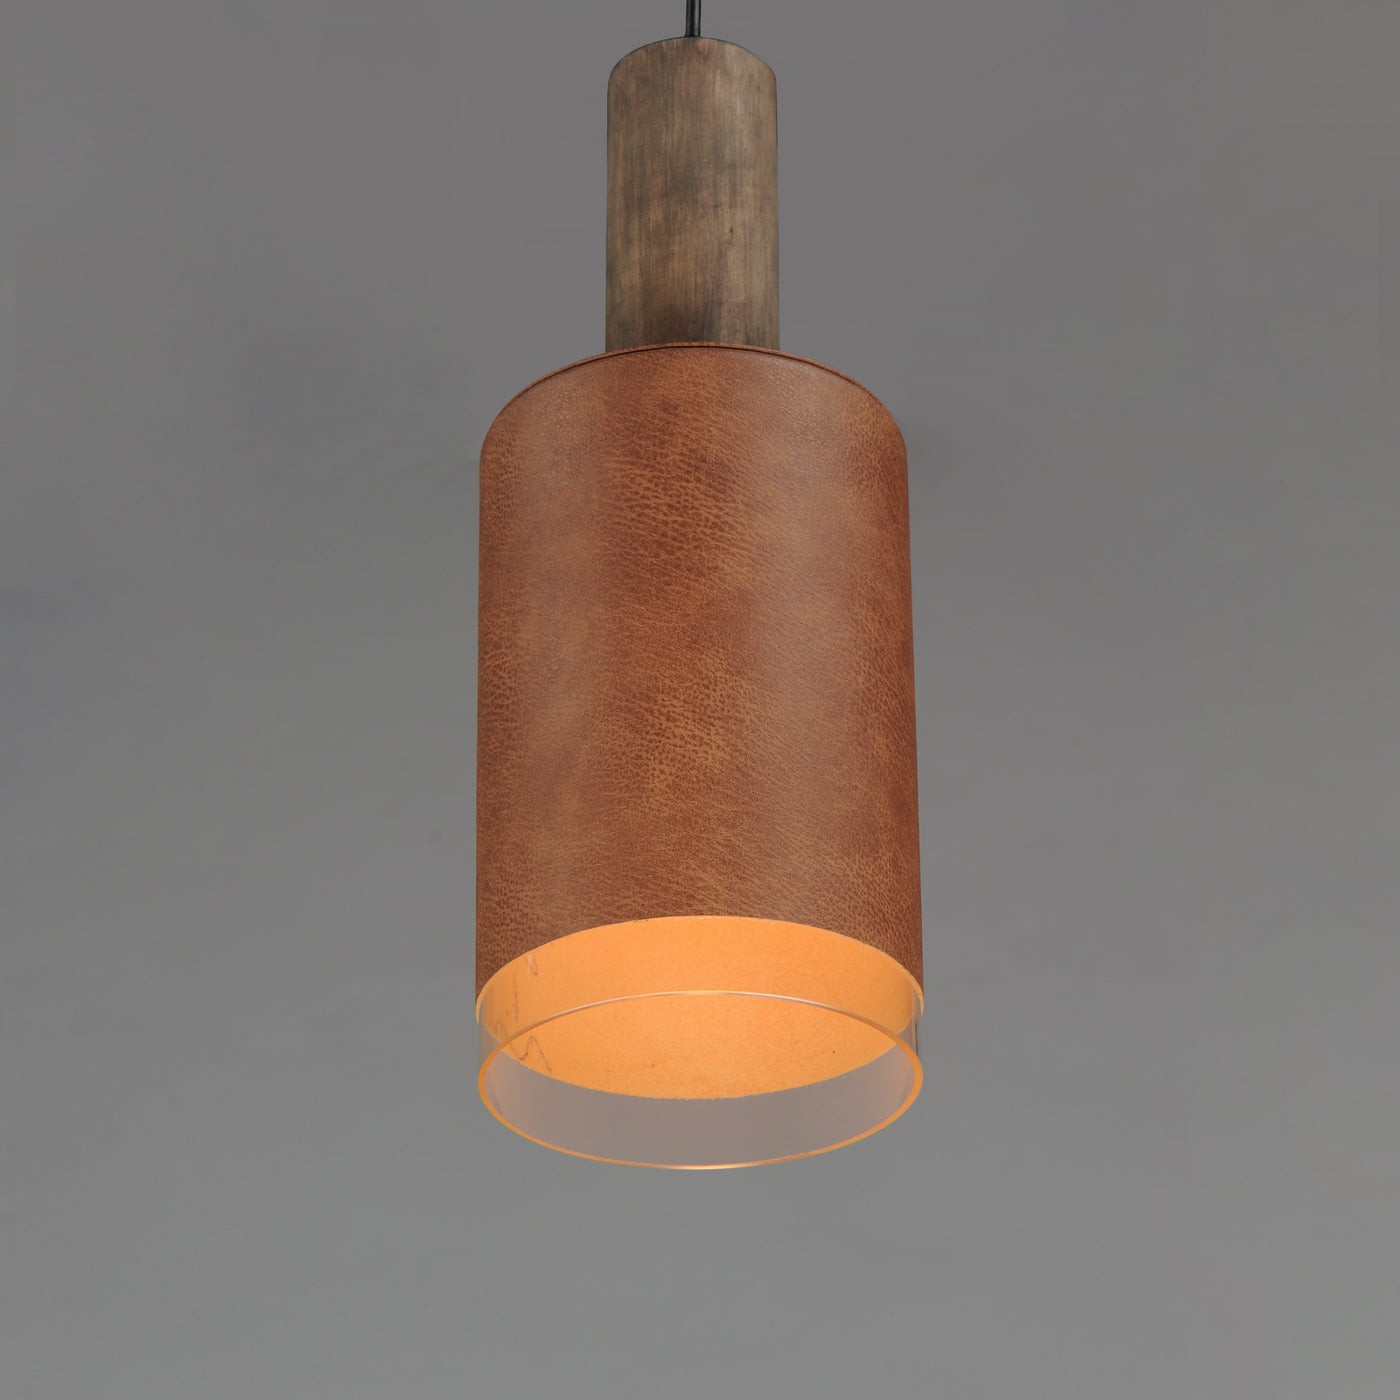 Weathered Wood and Tan Leather with Clear Glass Shade Pendant